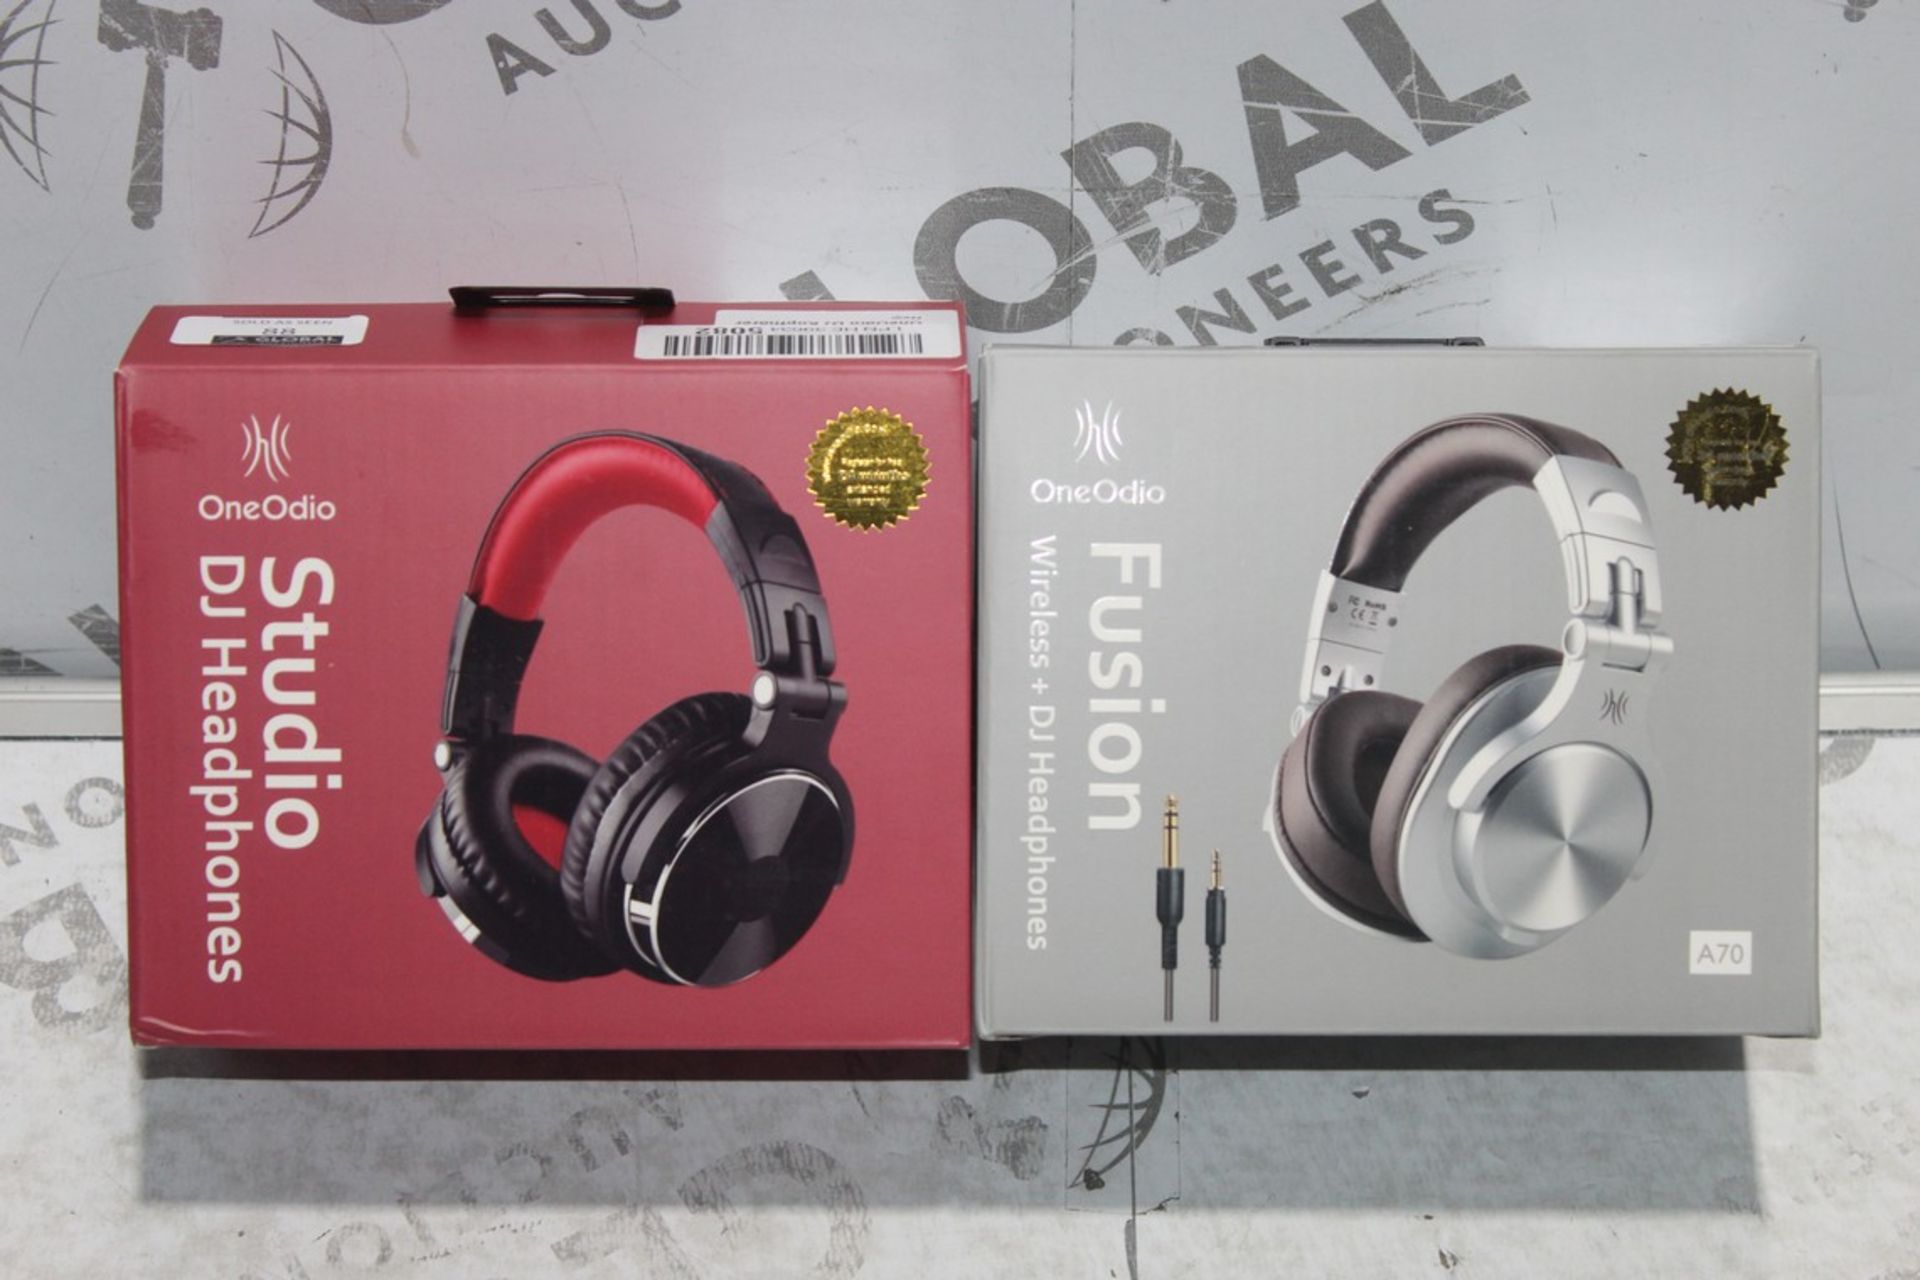 Boxed Pairs of One Audio Studio DJ Headphones to Include Fusion A70 RRP £40 Each